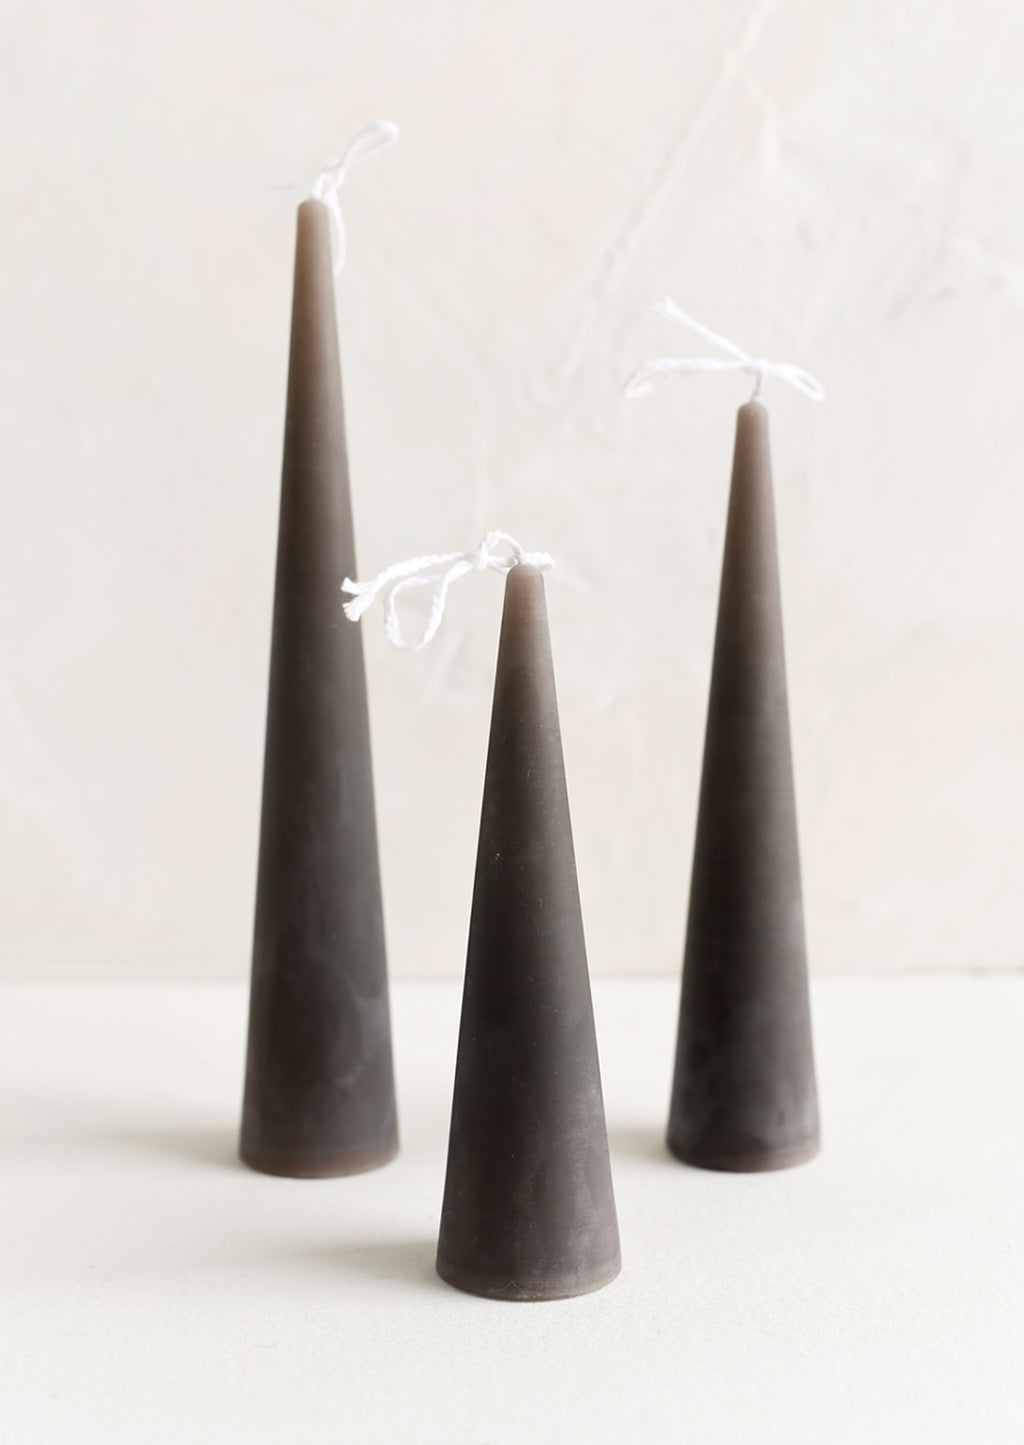 Small / Stone: Three lit cone-shaped taper candles in dark grey.